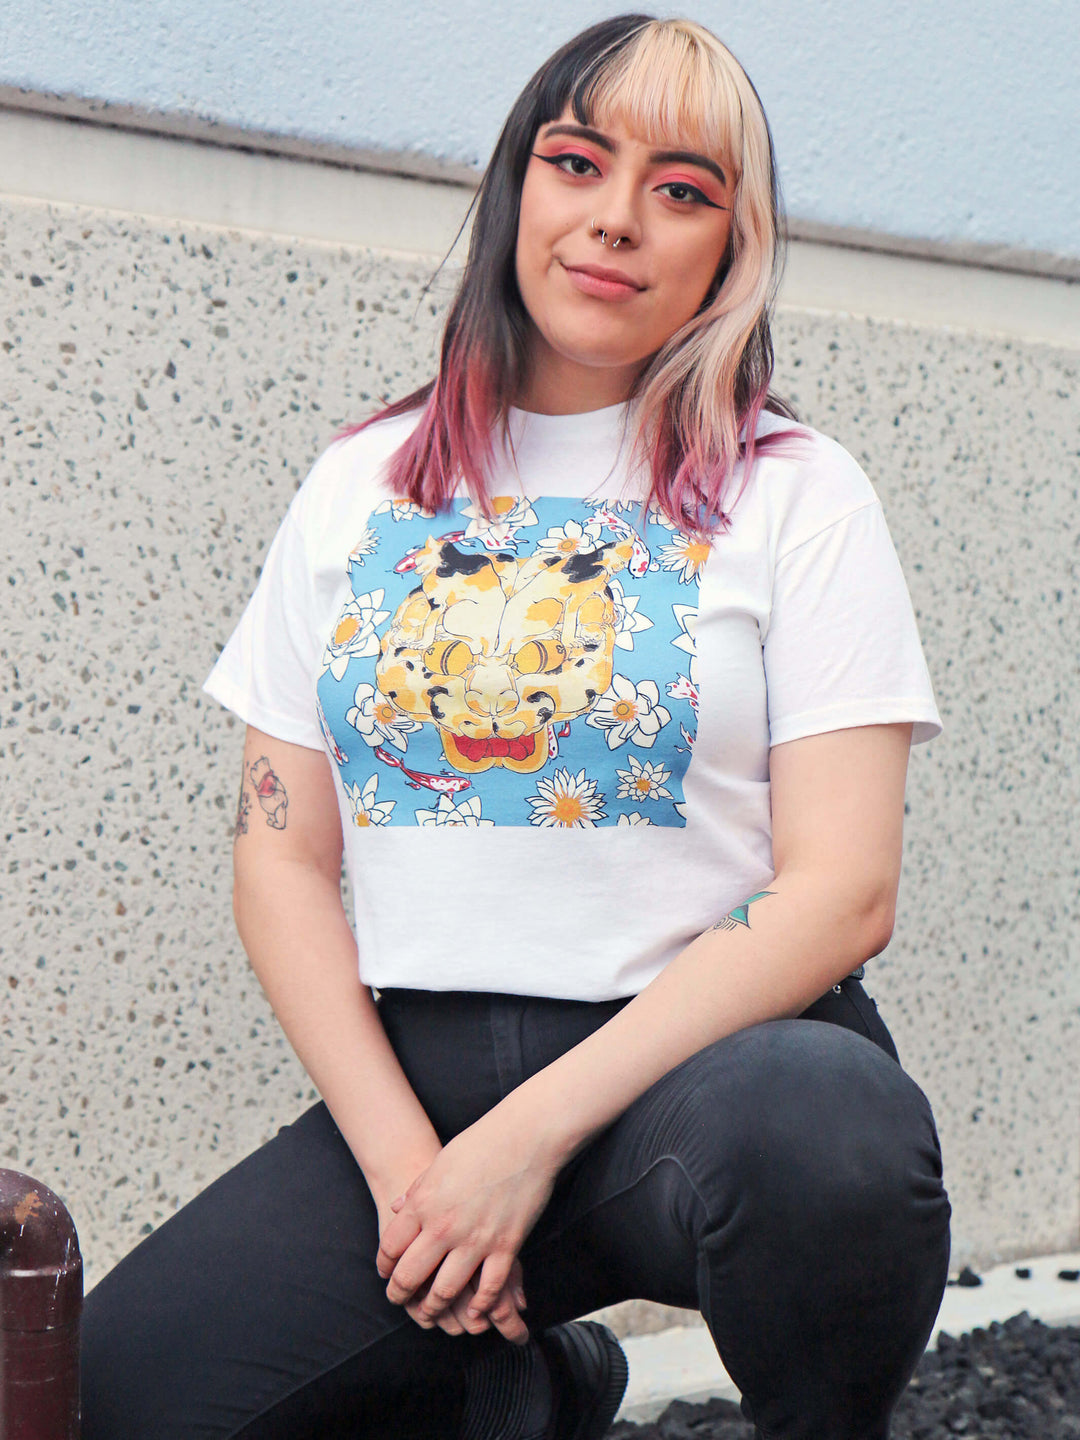 A model wearing a white Japanese cat and koi fish t-shirt.